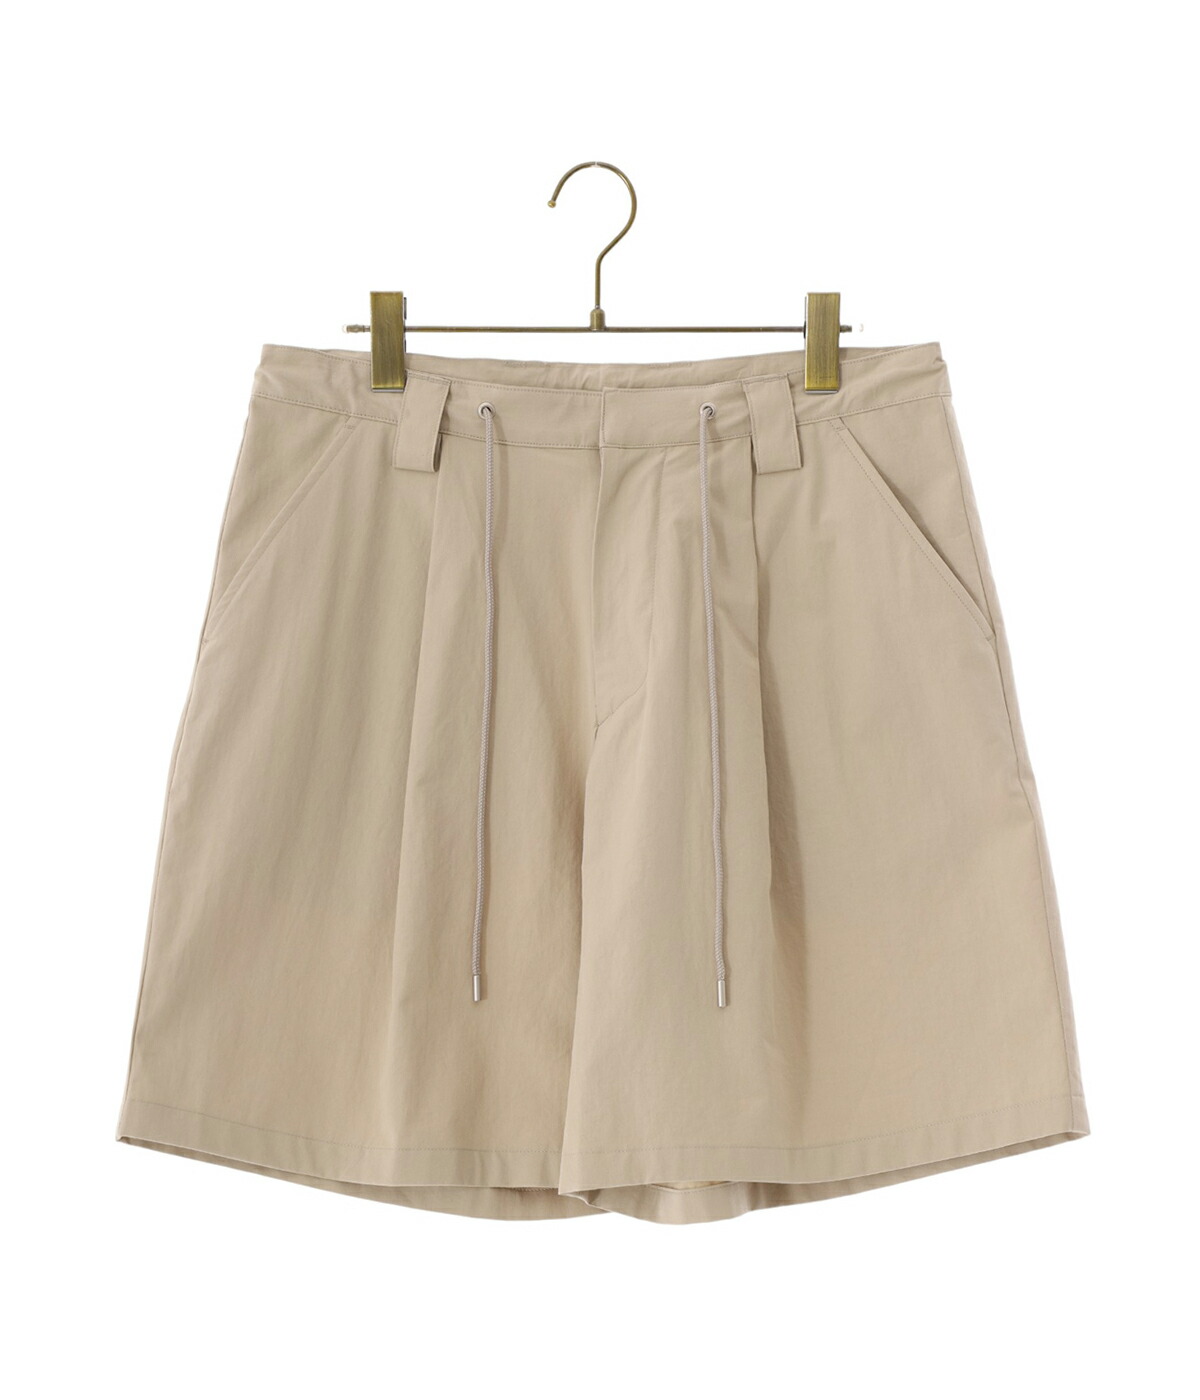 PORT BY ARK / ポートバイアーク ： Twill Tuck Shorts / 全2色 ：...